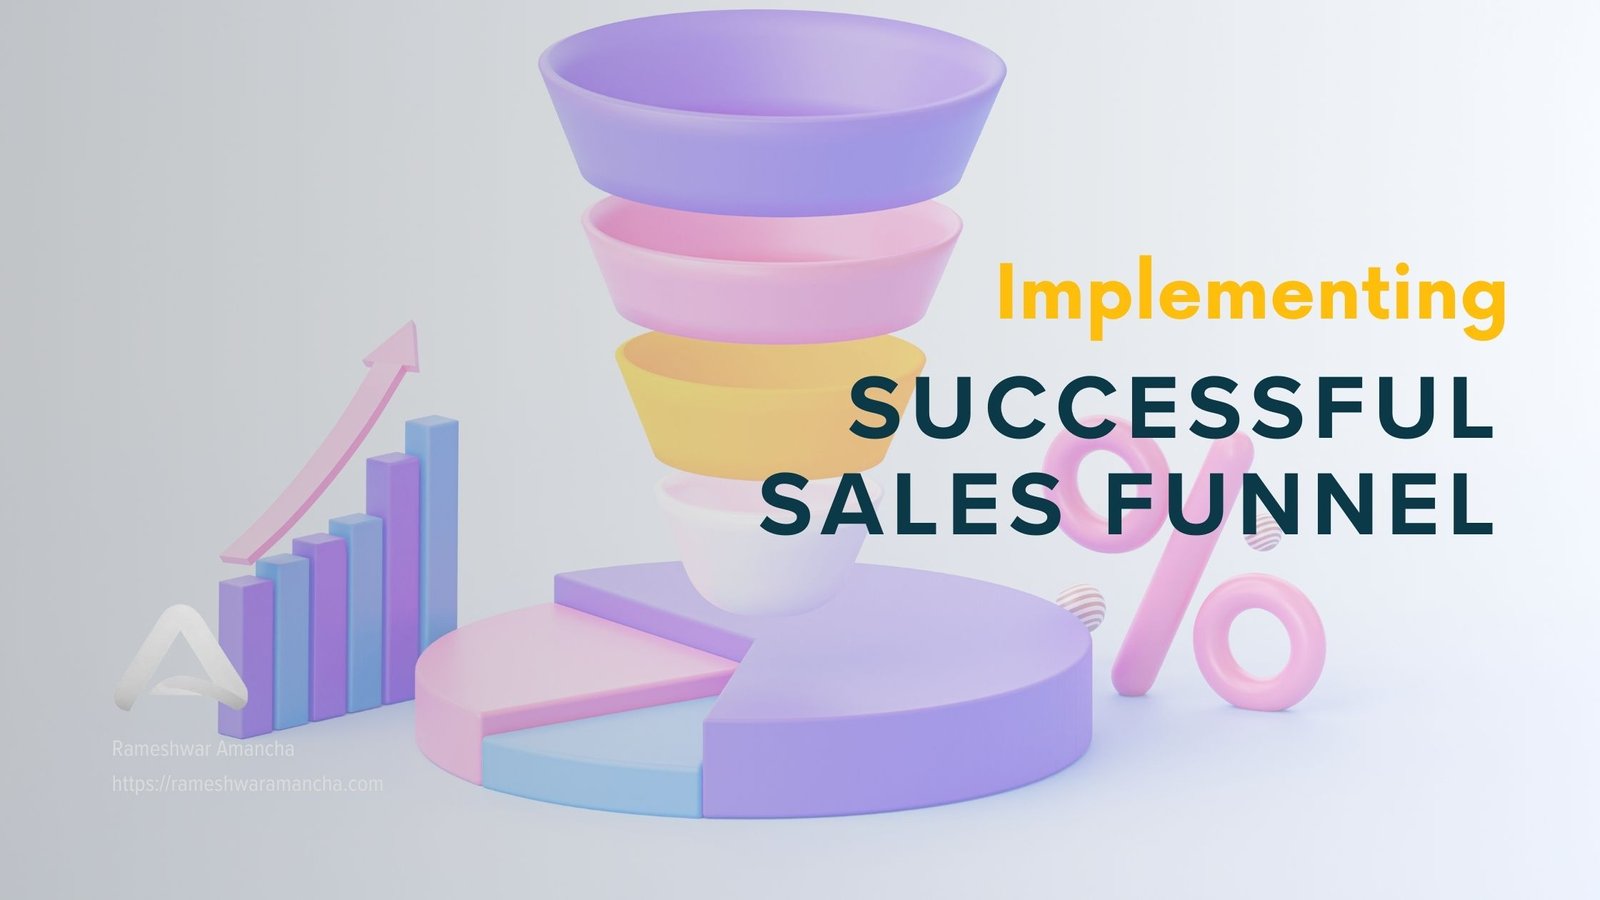 Implementing a Successful Sales Funnel